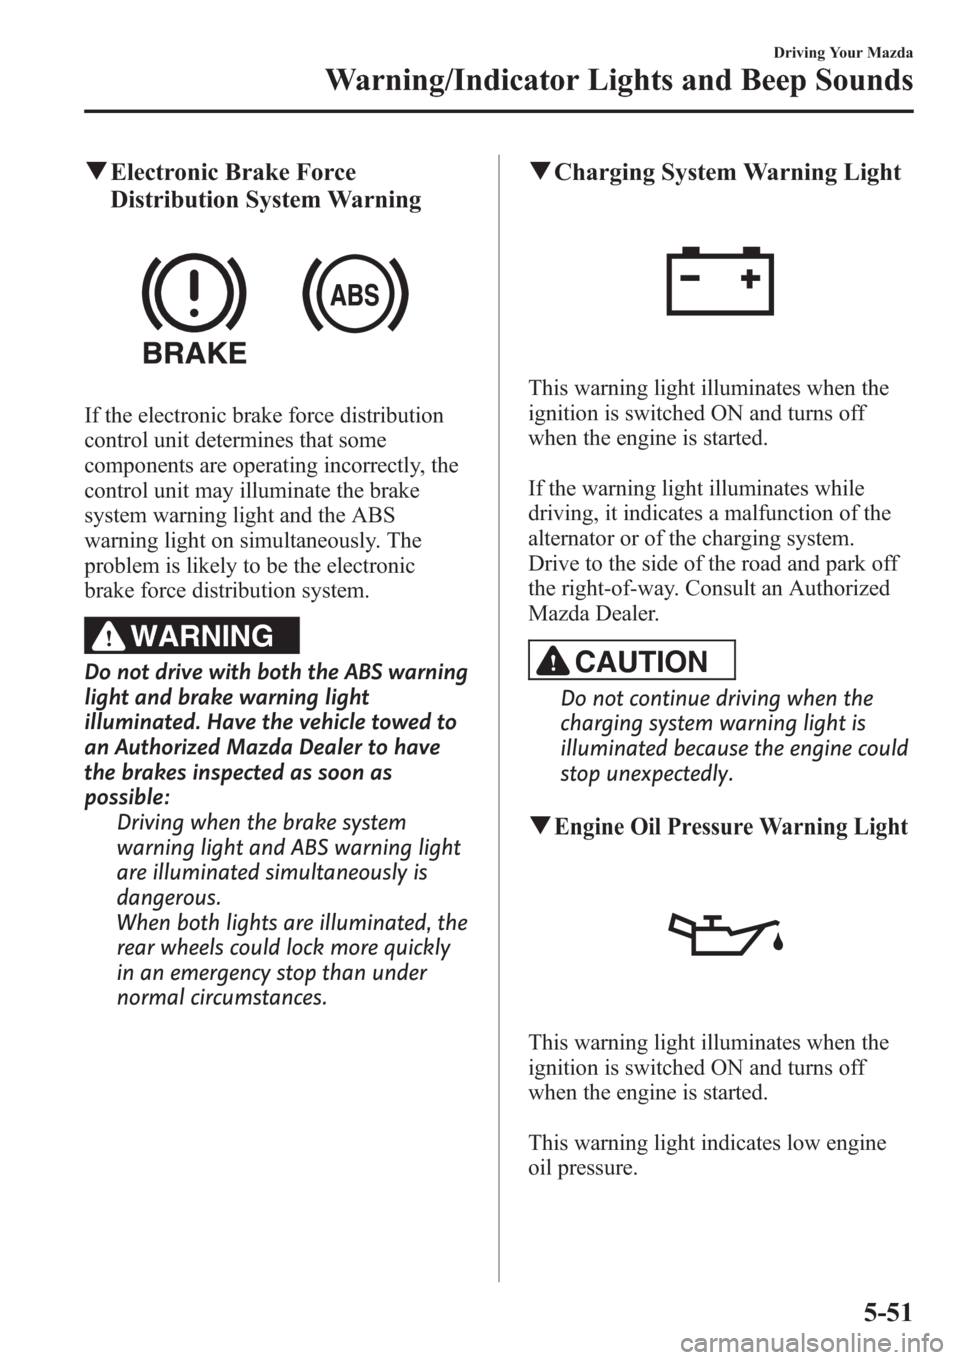 MAZDA MODEL 3 HATCHBACK 2013  Owners Manual (in English) qElectronic Brake Force
Distribution System Warning
If the electronic brake force distribution
control unit determines that some
components are operating incorrectly, the
control unit may illuminate t